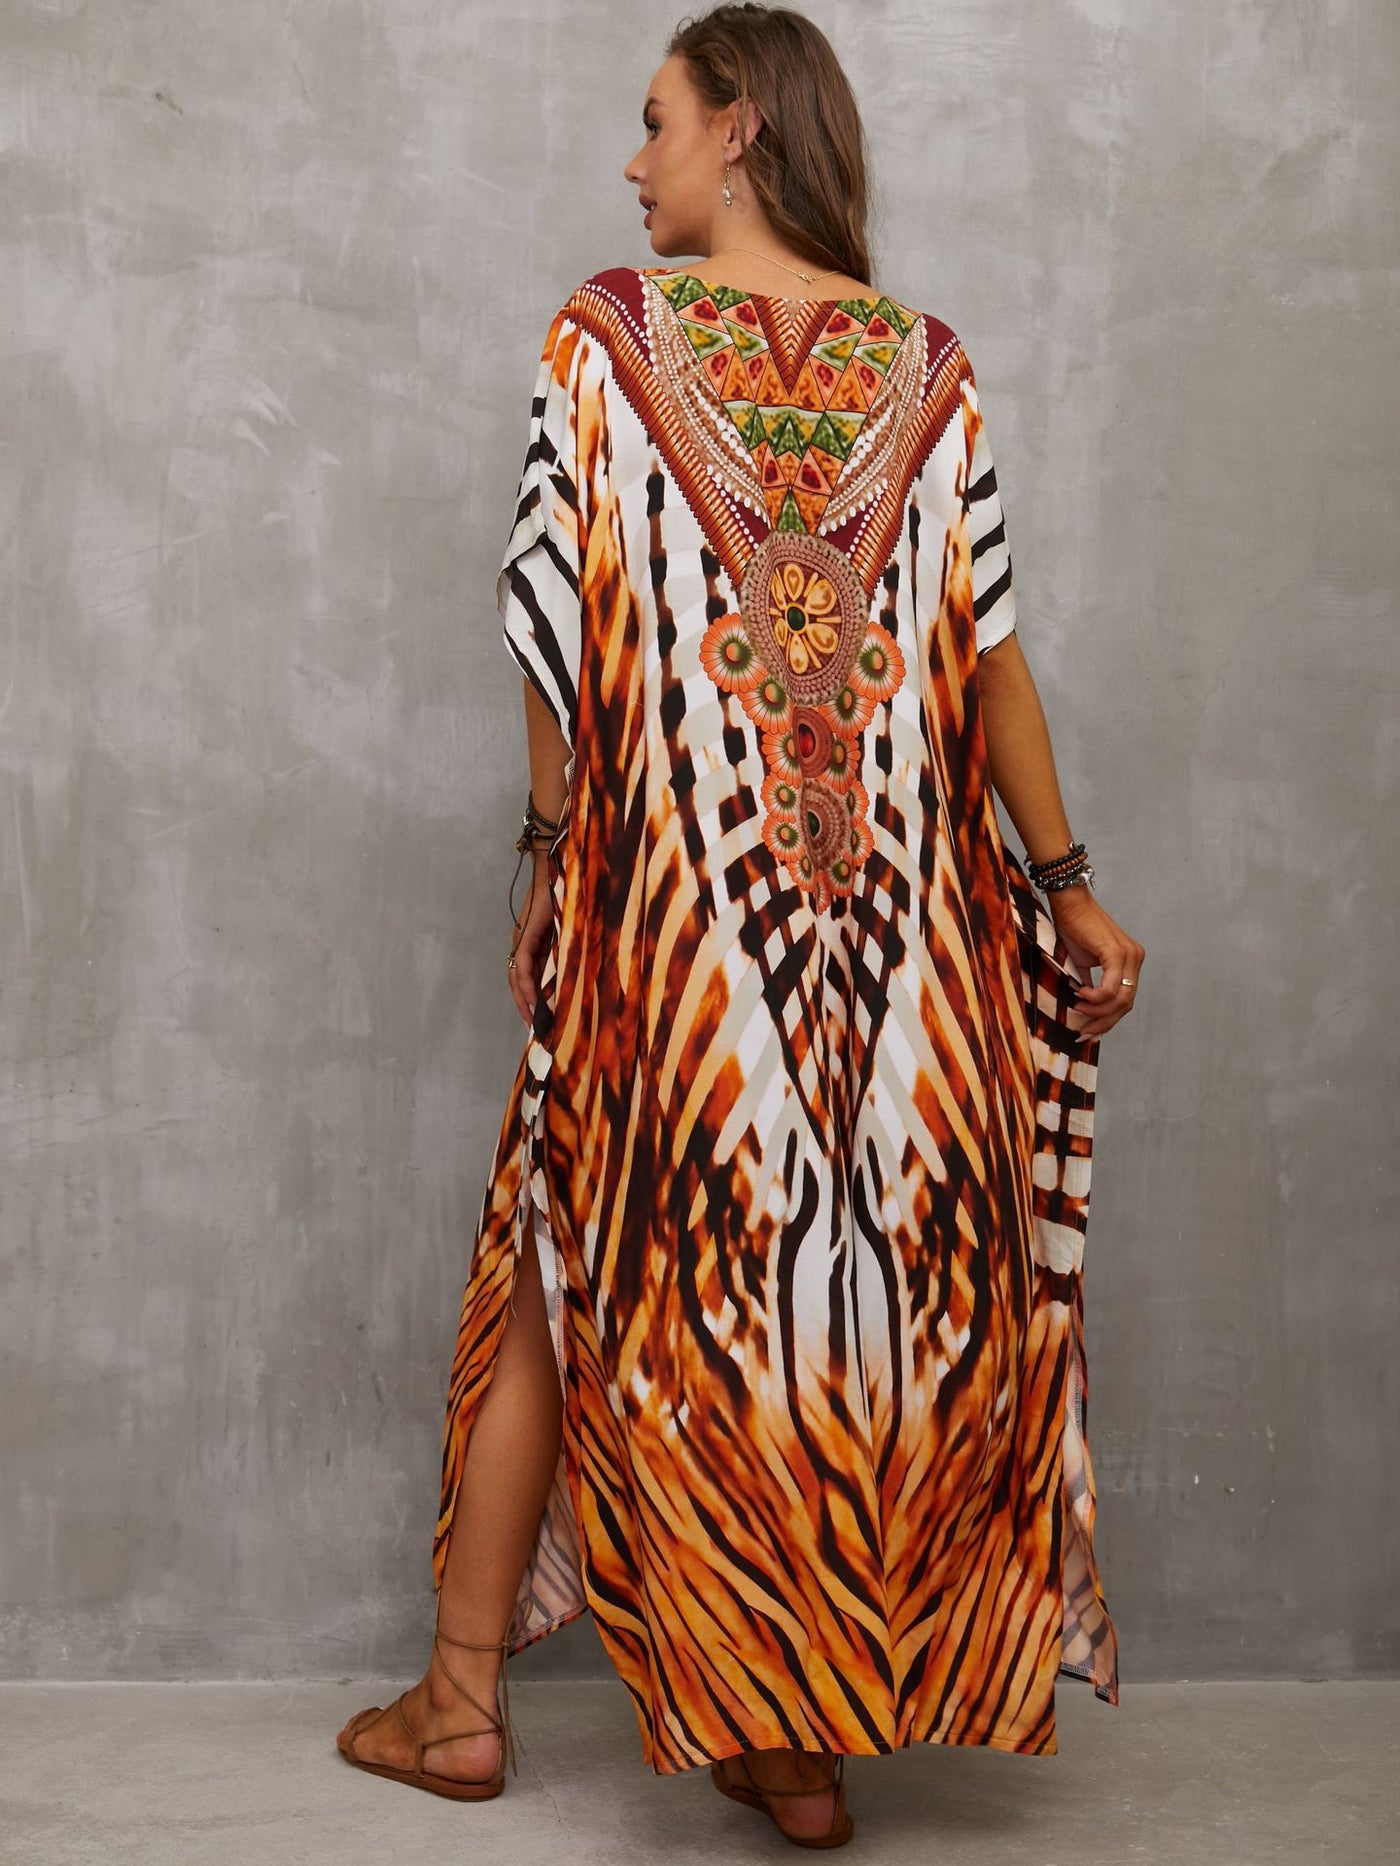 Flora Printed Loose Kaftan Casual Summer Vacation Wear Tunic Women Clothes Beach Wear Swim Suit Cover Up Q1464-1102-4